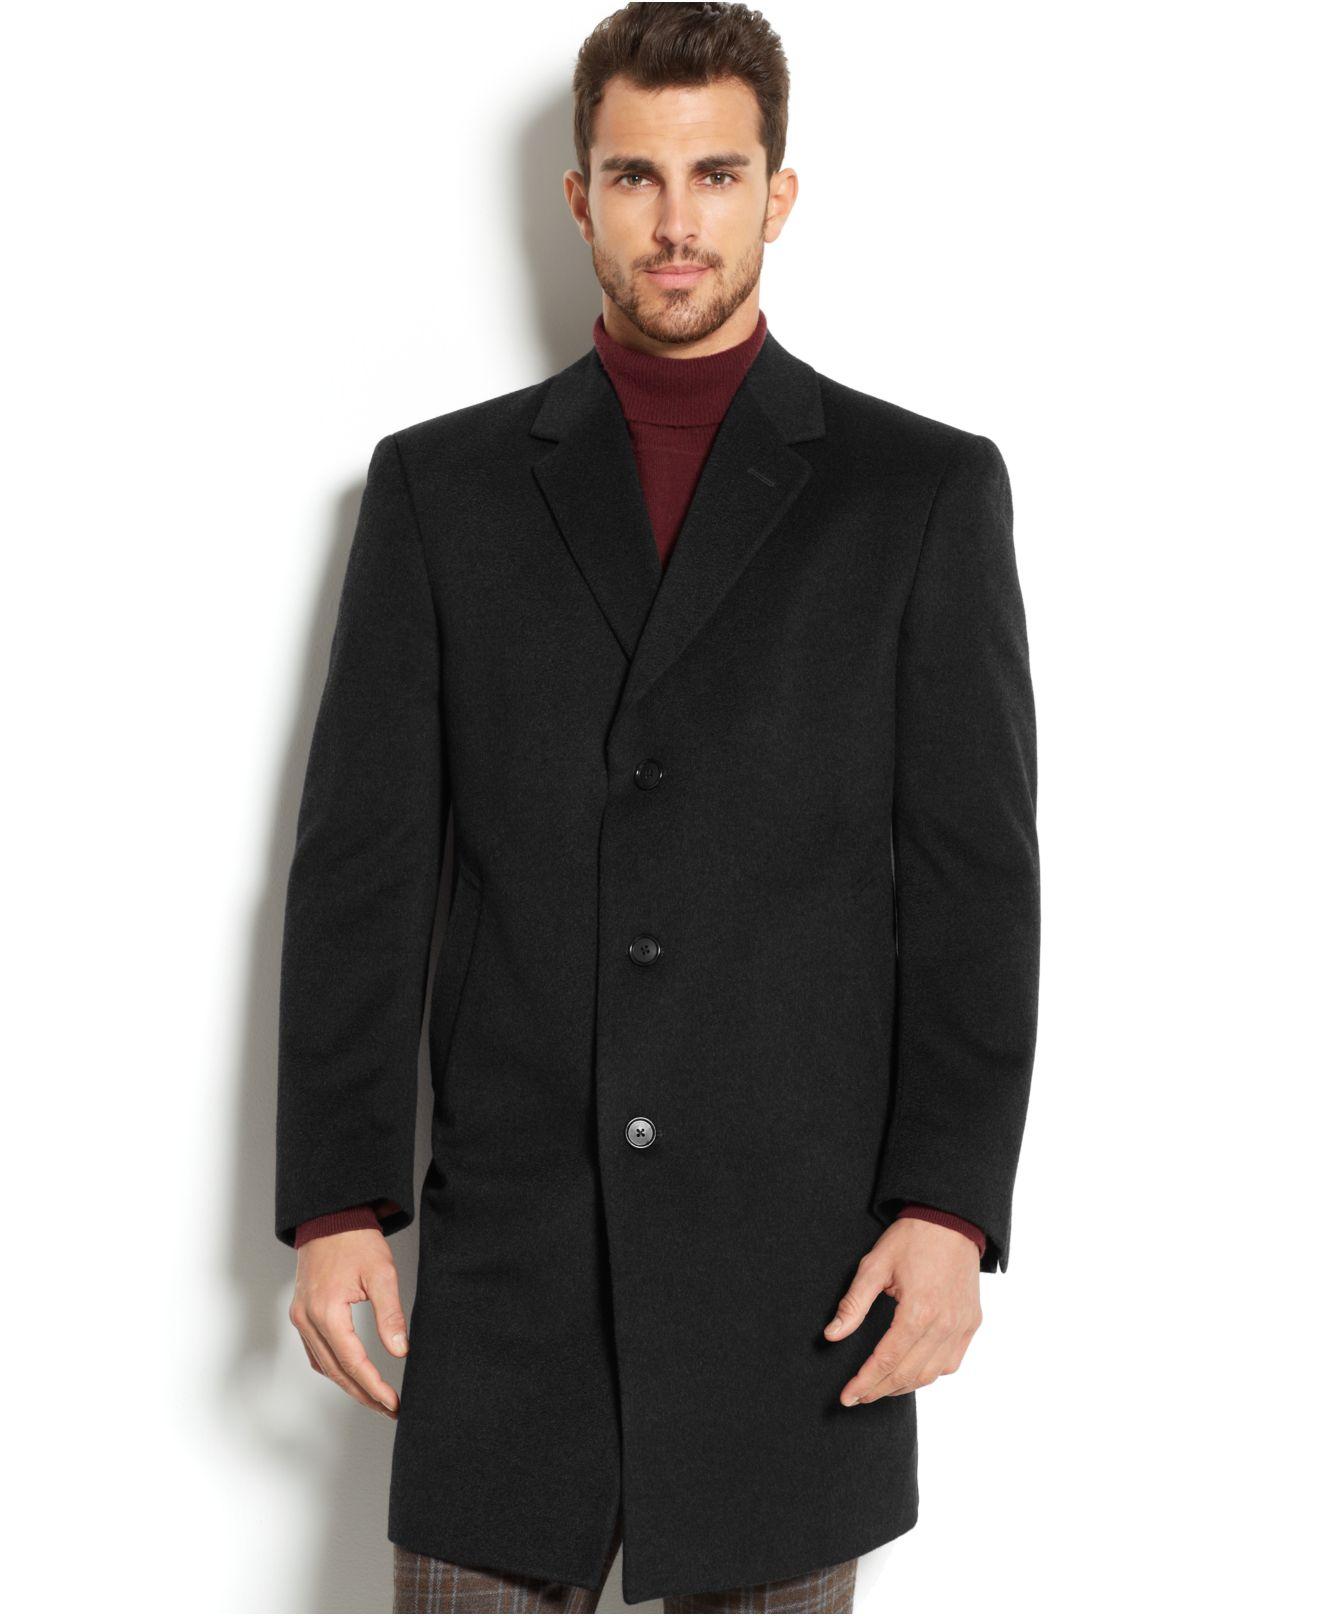 Lyst - Kenneth Cole New York 100% Cashmere Raburn Slim-fit Overcoat in ...